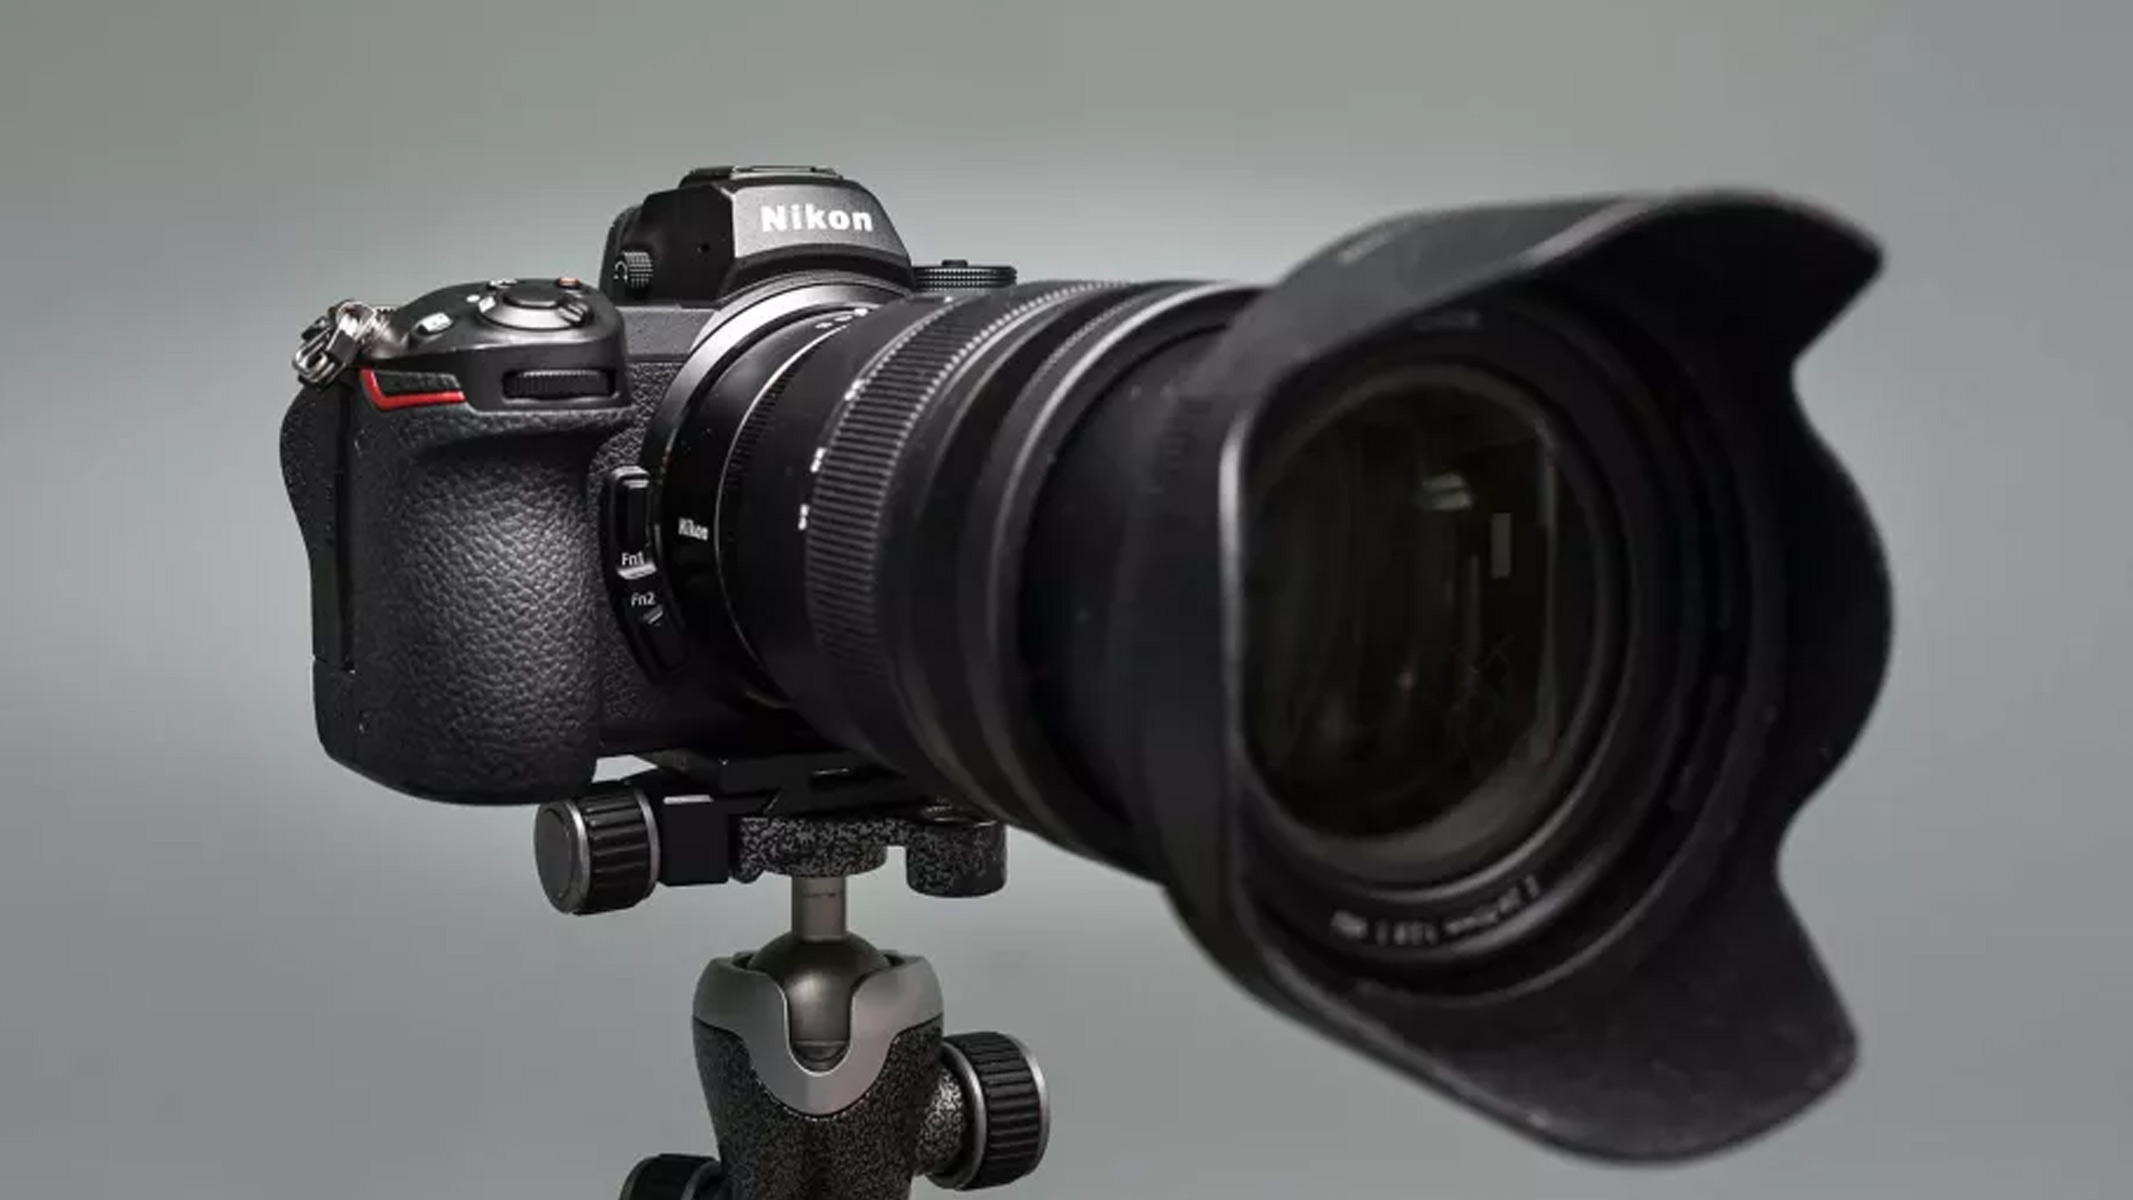 The Nikon Z7 II on a tripod with a lens attached